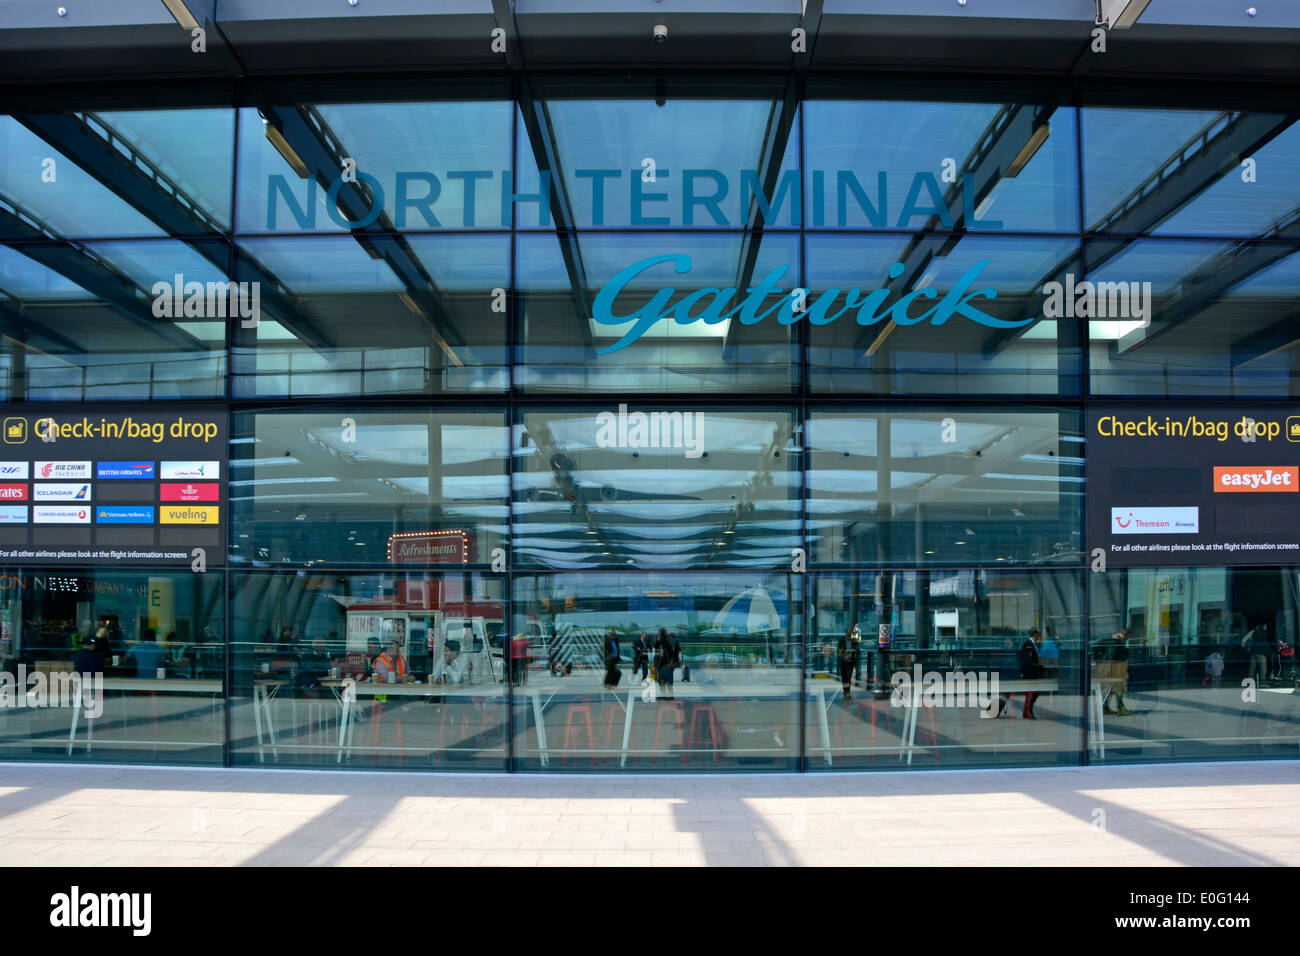 Gatwick London Airport North Terminal entrance & sign passengers inside seen through reflections translucent glass wall Crawley West Sussex England UK Stock Photo